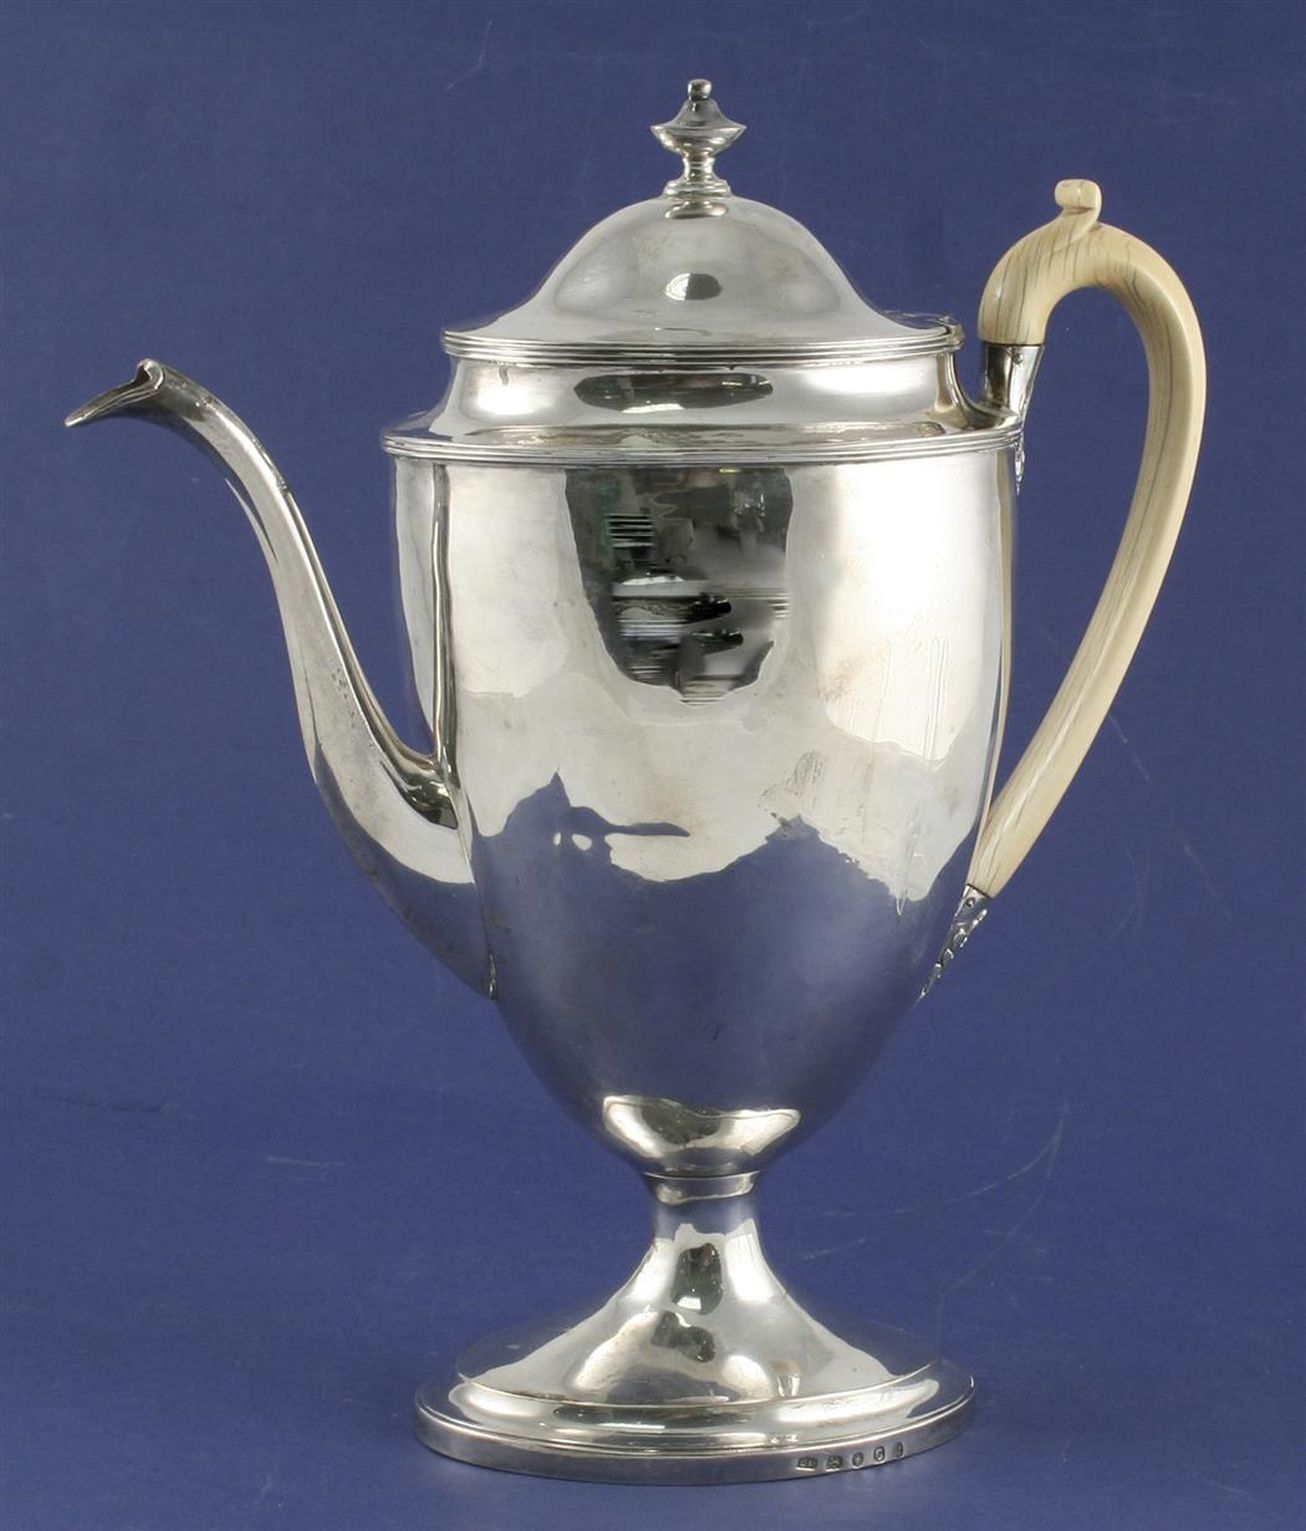 A George III silver urn shaped pedestal coffee pot, with ivory handle and plain body, on oval